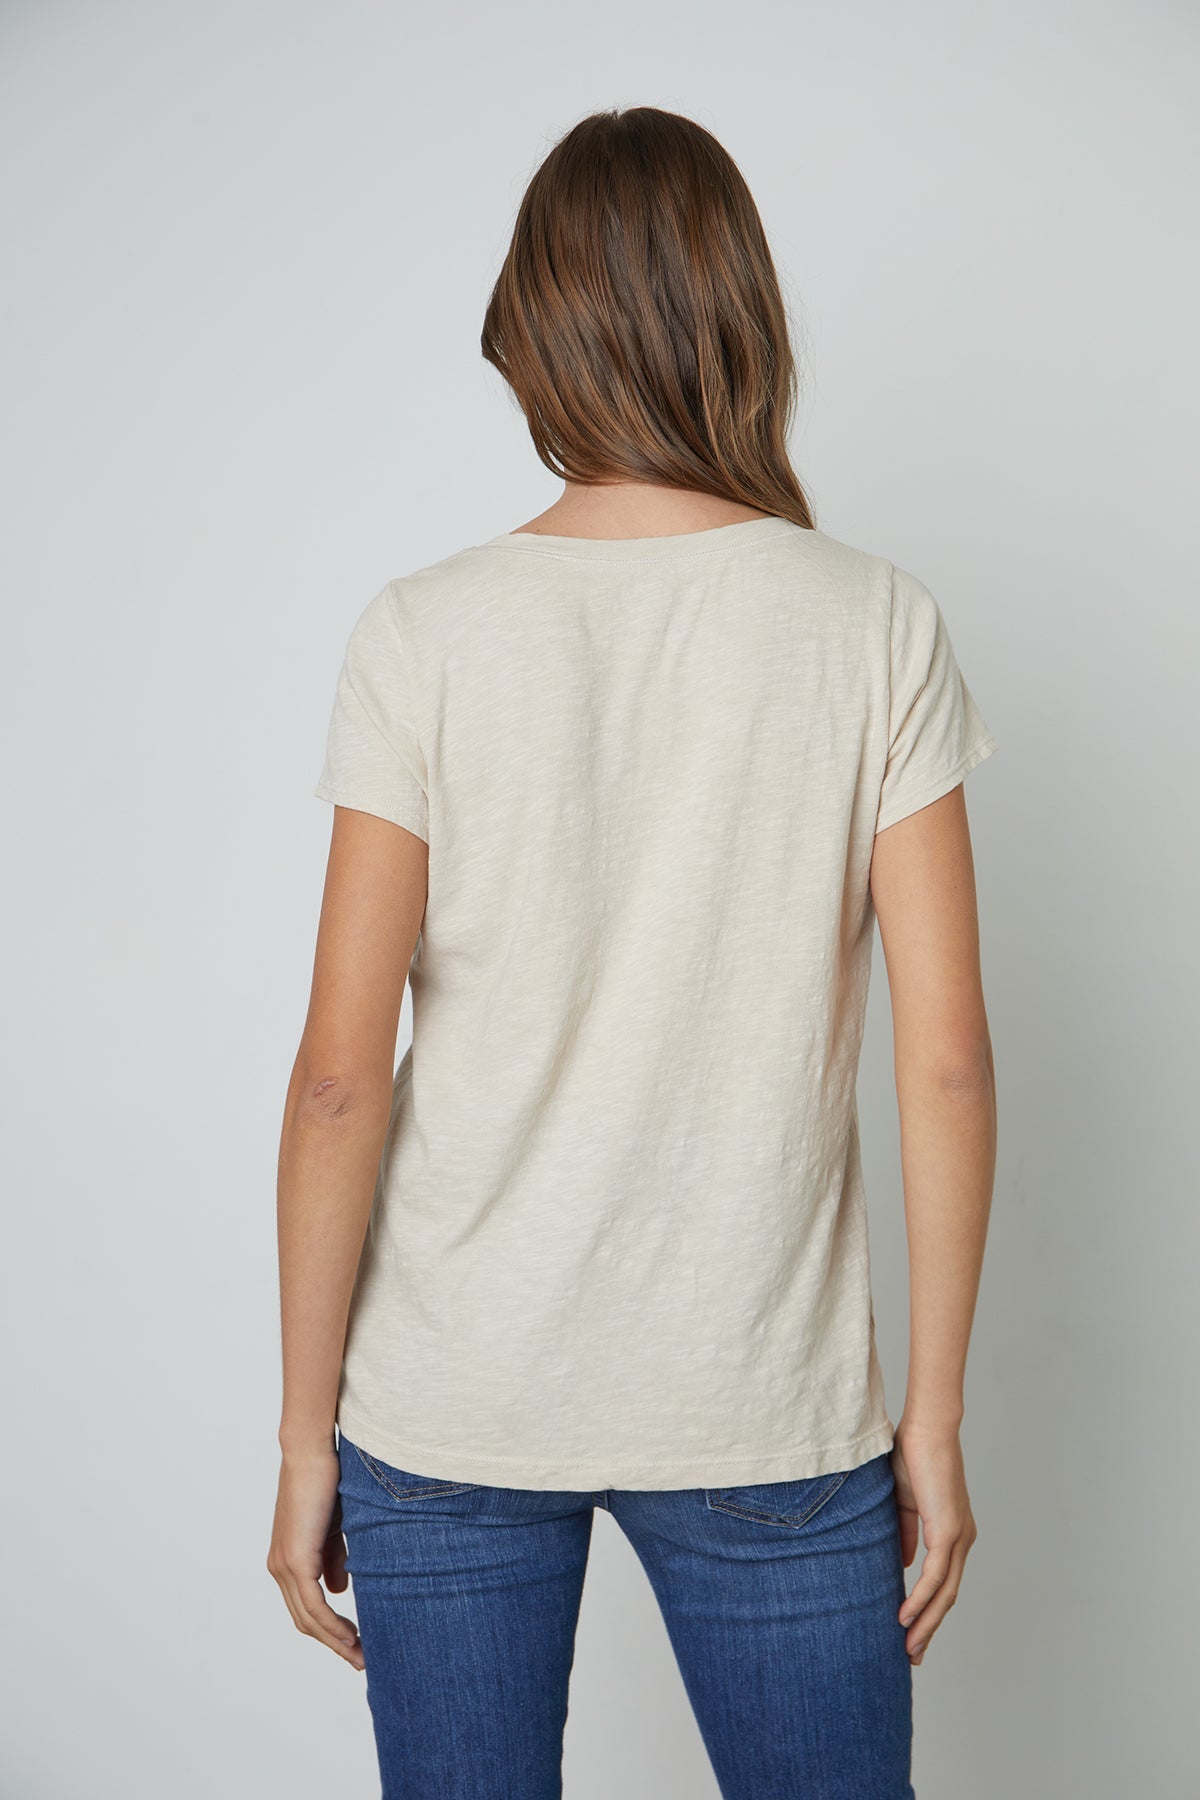   Lilith Tee in Bisque Back View 